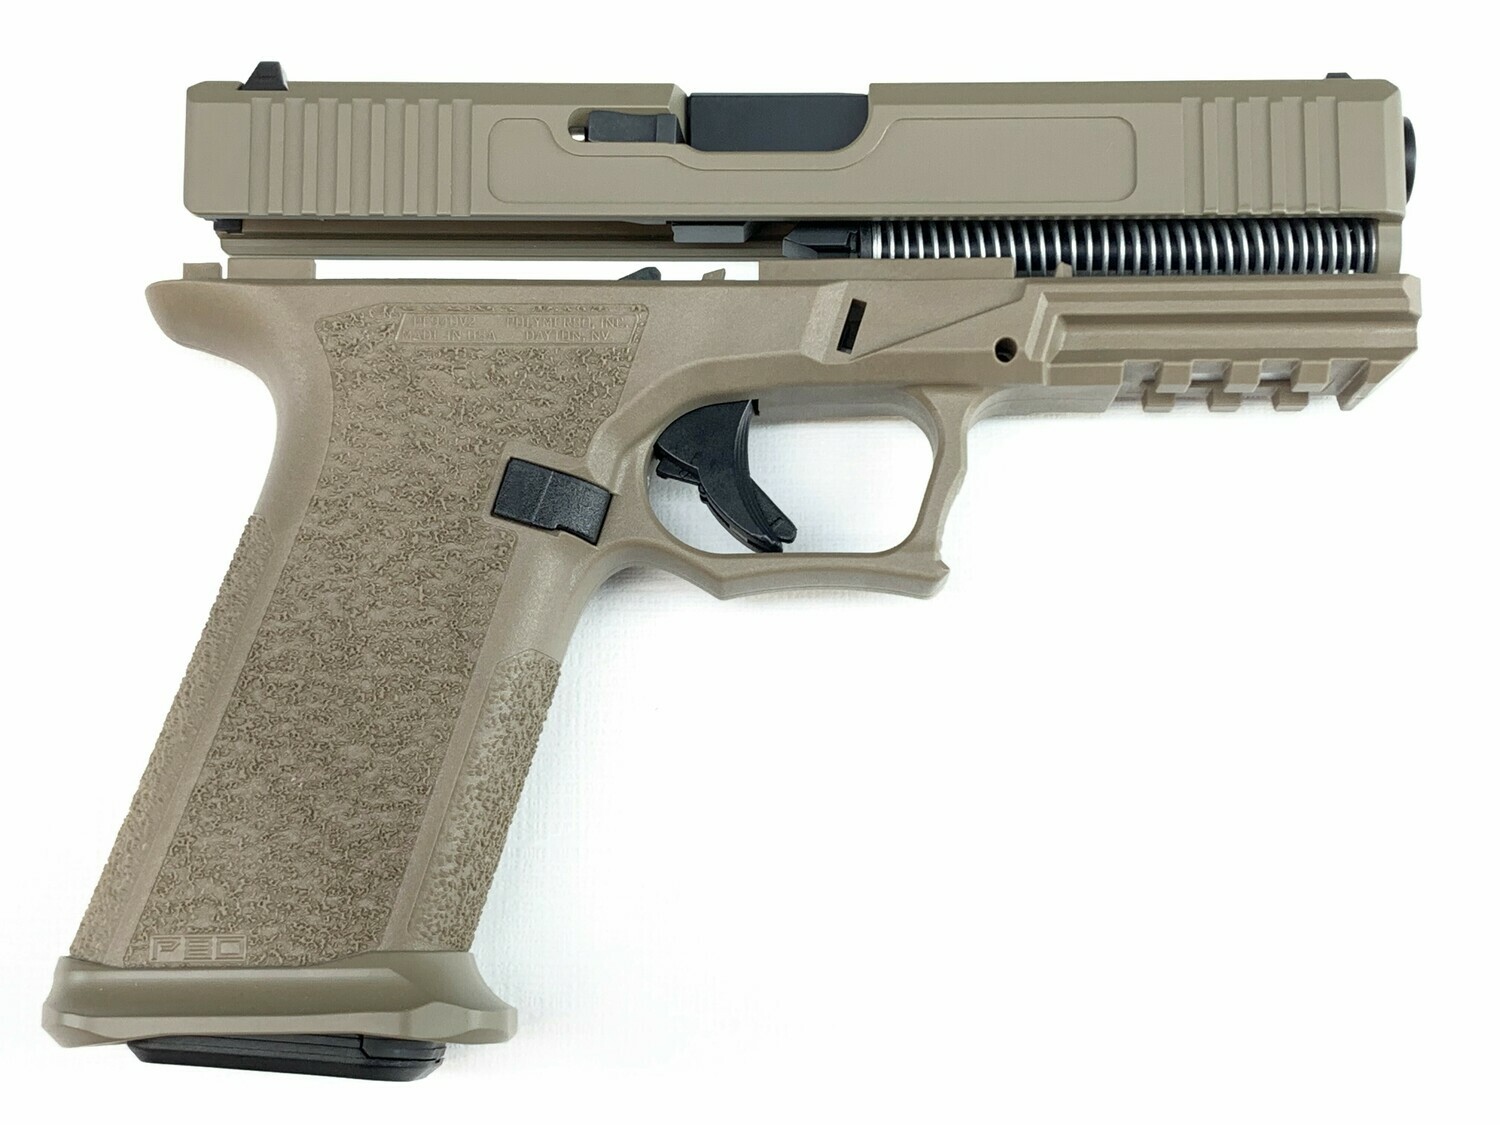 Patriot G17 80% Pistol Build Kit 9mm - Polymer80 PF940V2 - FDE - Steel City Magwell - LOWER PARTS KIT NOT INCLUDED